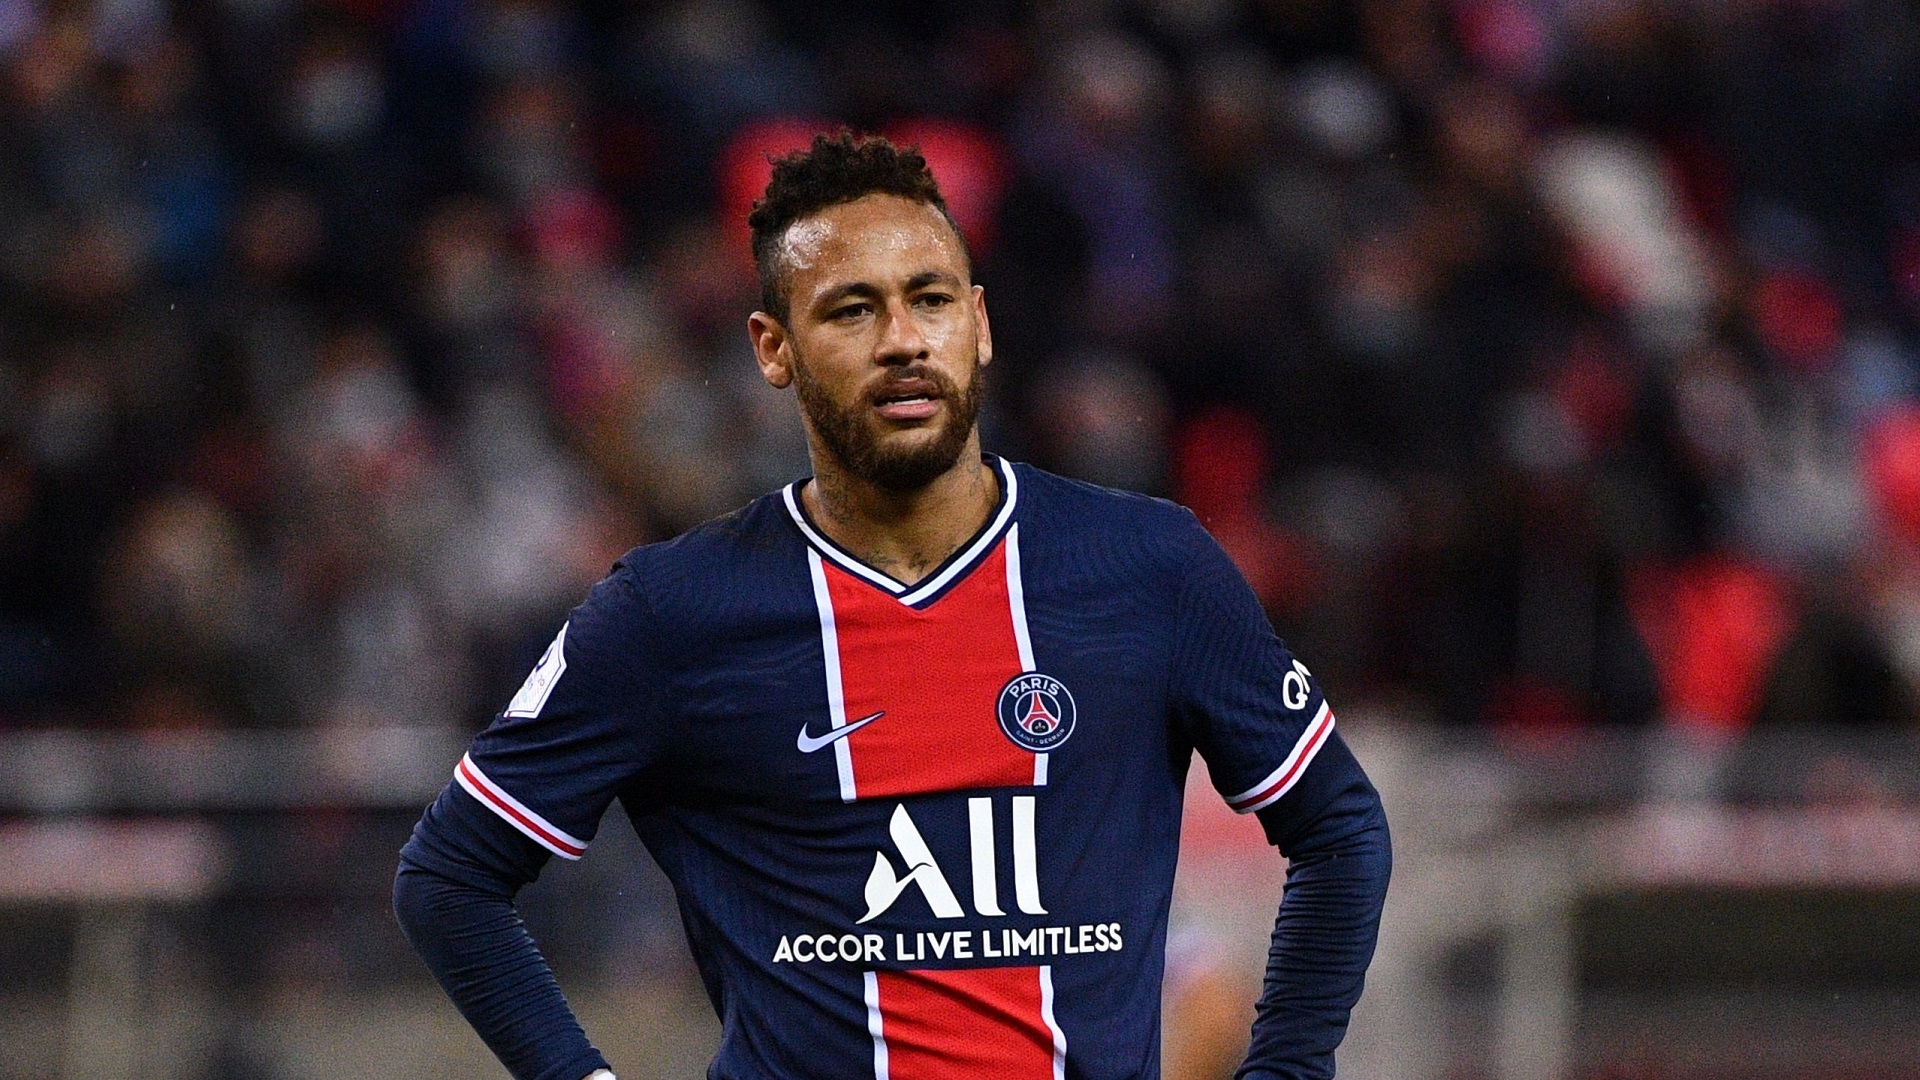 Neymar injury concern for PSG as Tuchel says he 'needs to speak with